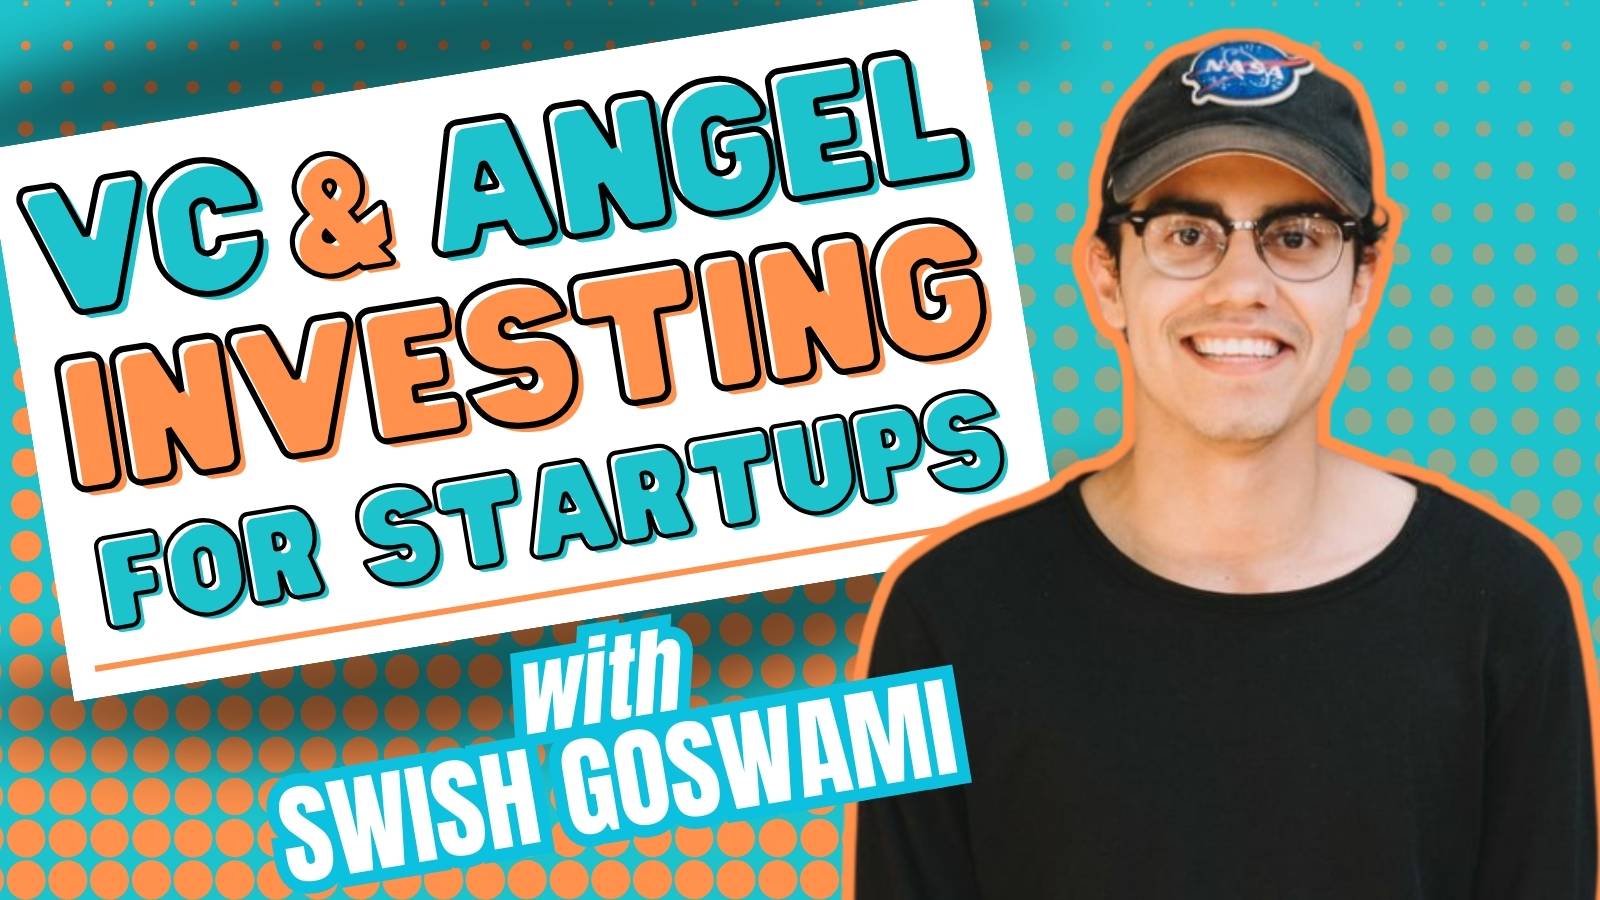 VC and Angel Investing for Startups